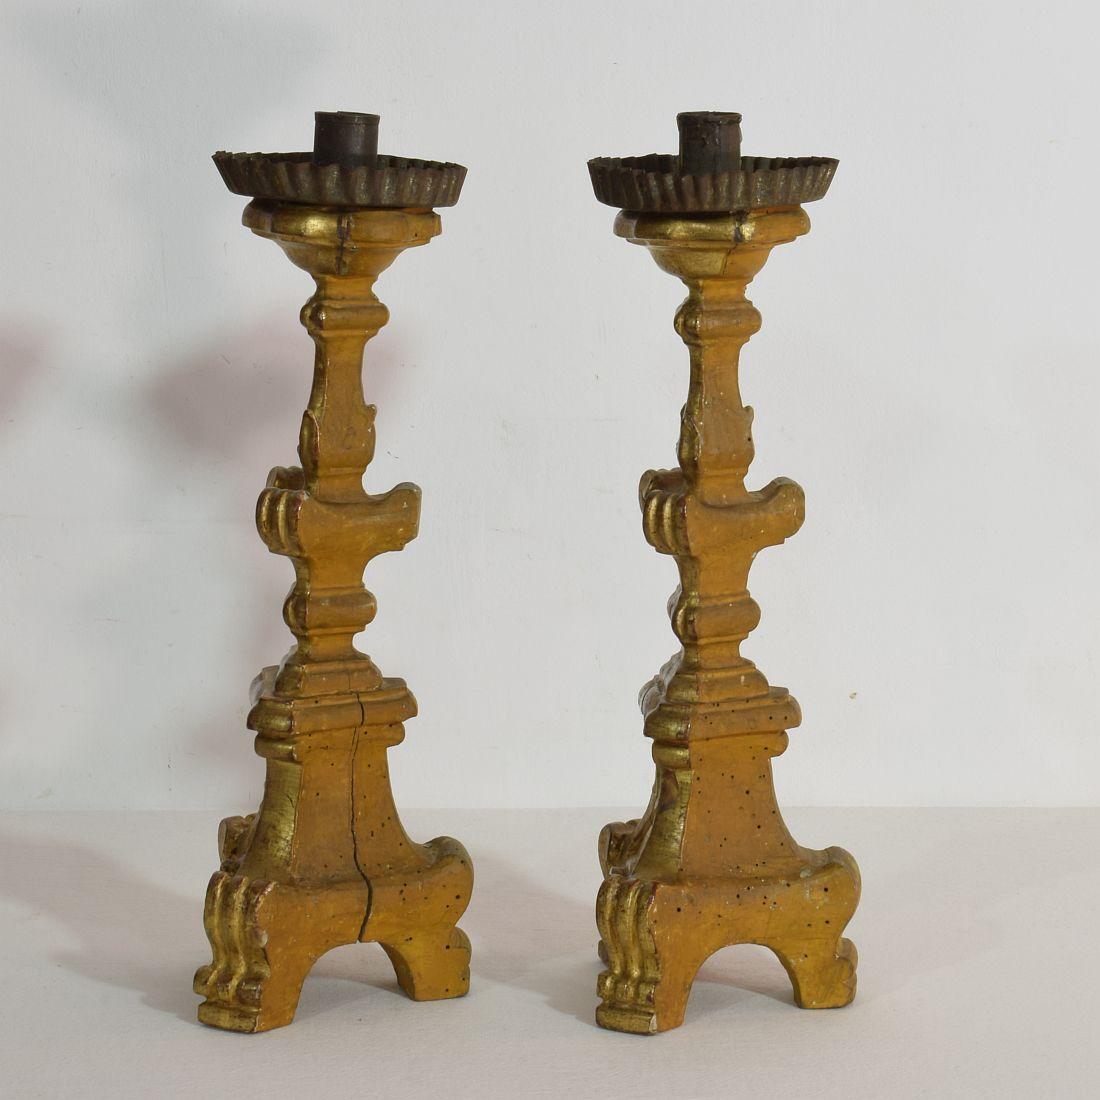 Pair of 18th Century Italian Giltwood Baroque Candlesticks or Candleholders 2